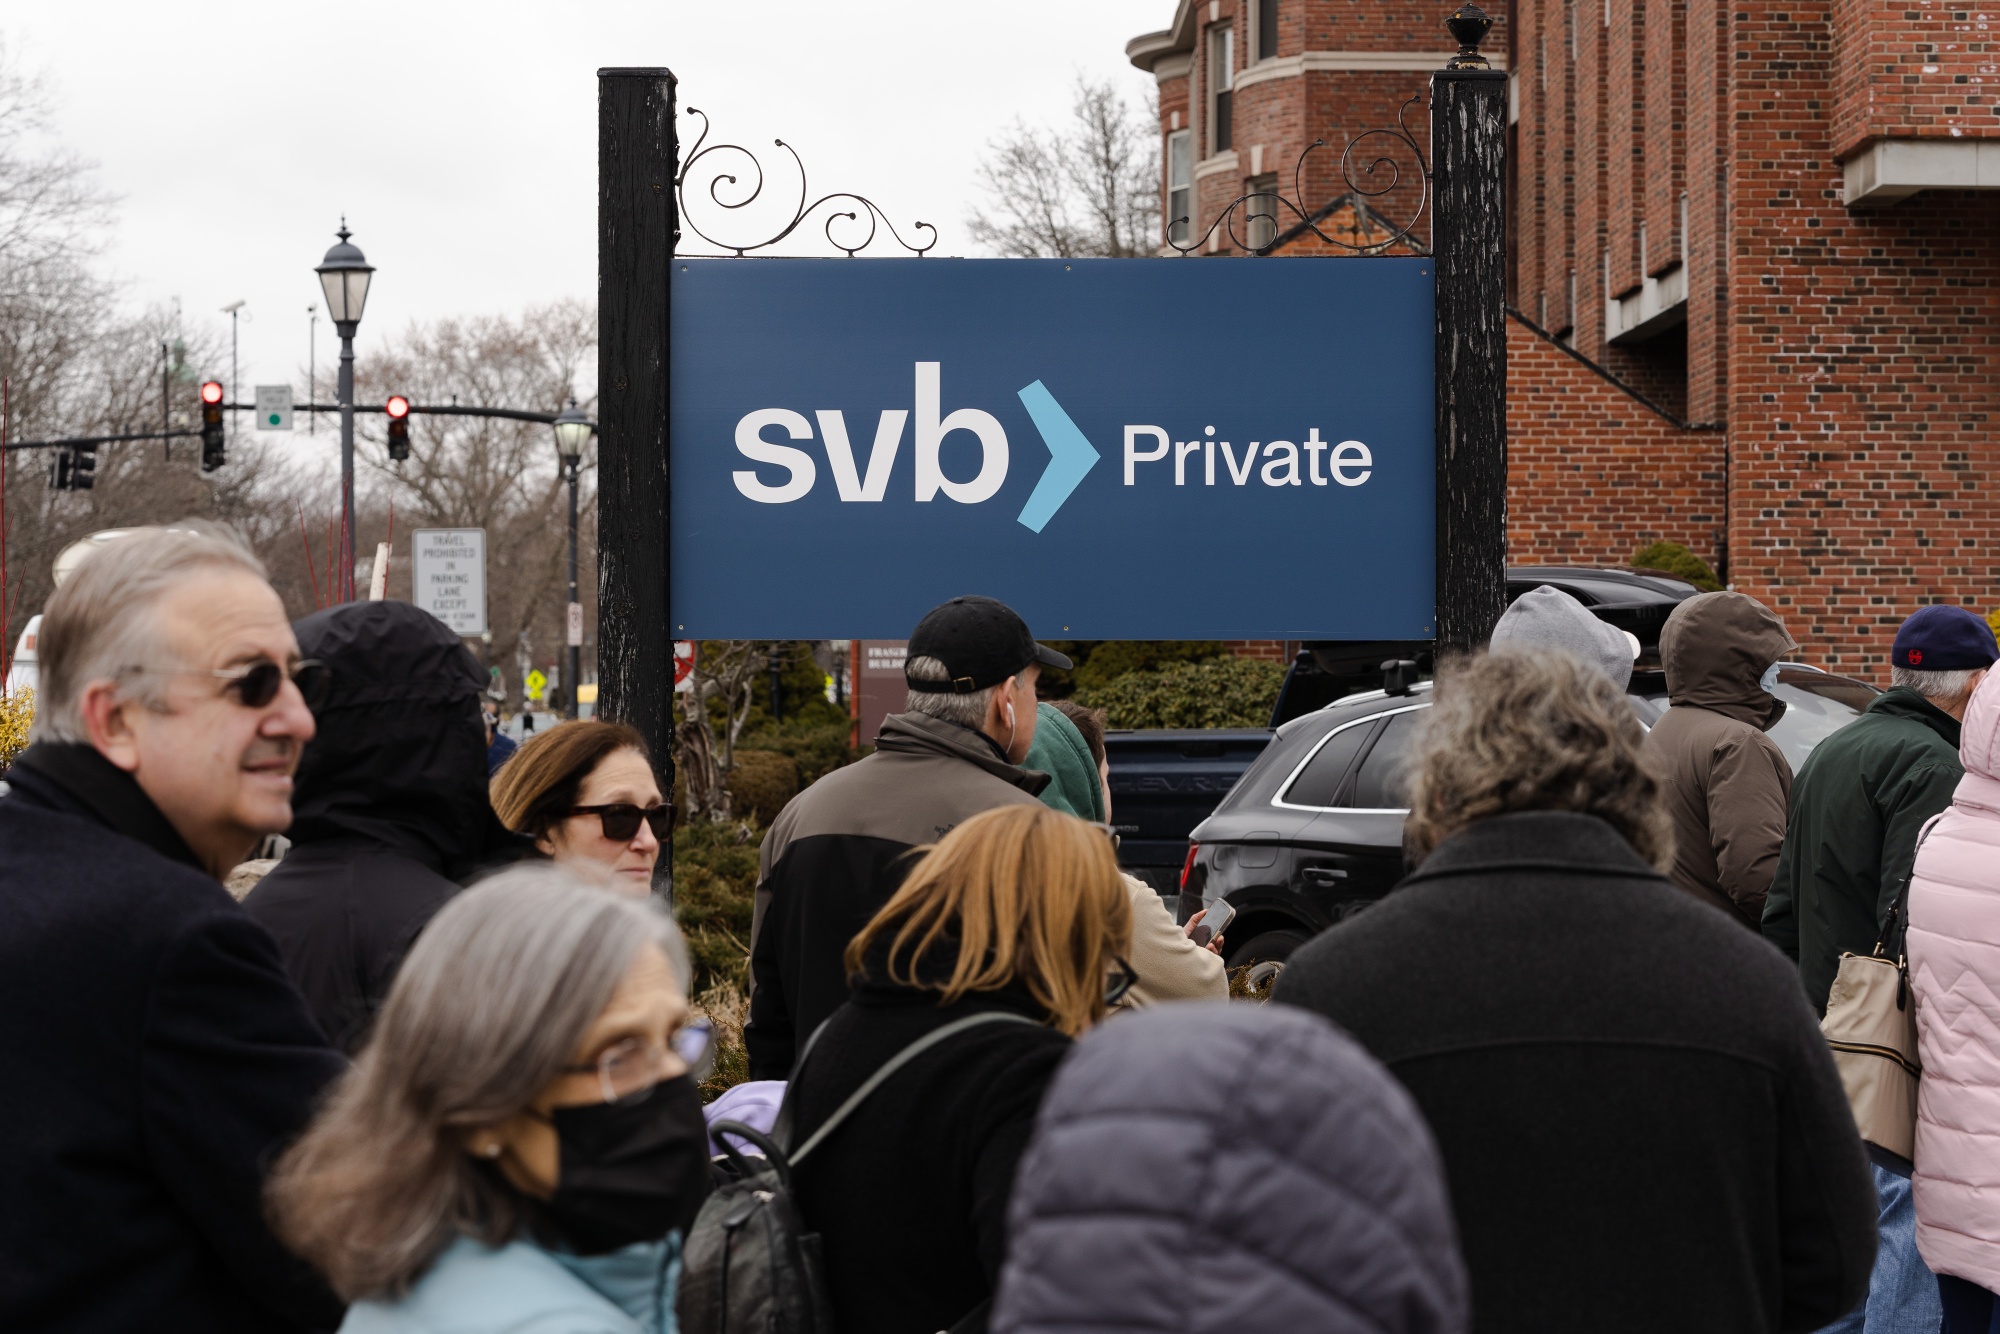 Customers outside of a Silicon Valley Bank branch in Wellesley, Massachusetts.